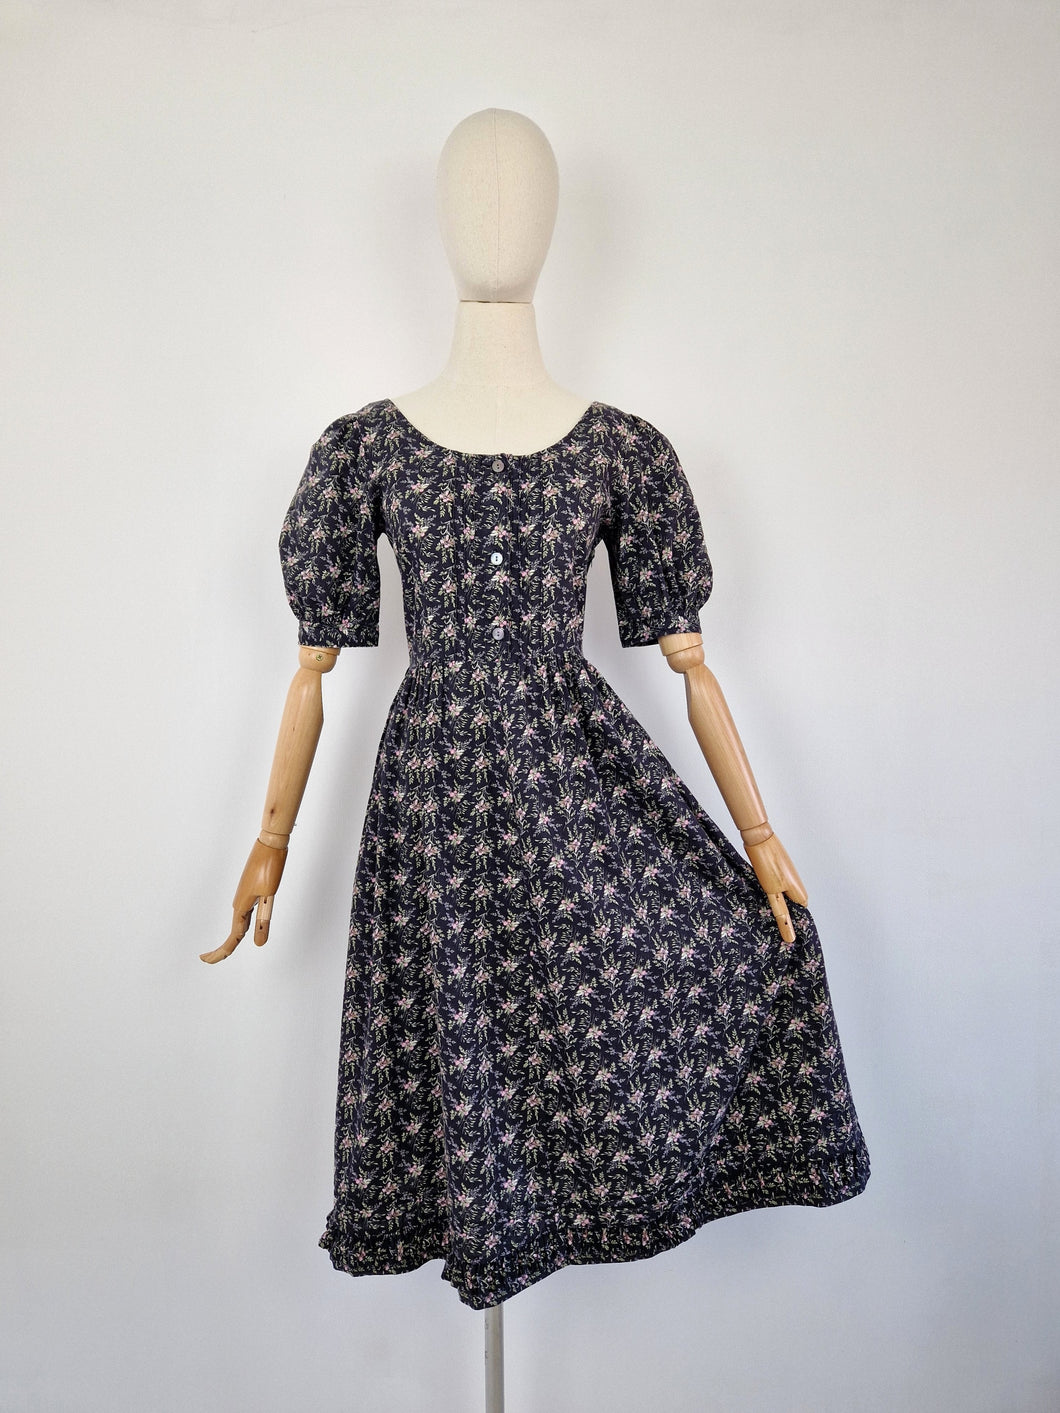 Vintage early 80s Laura Ashley made in Carno prairie dress